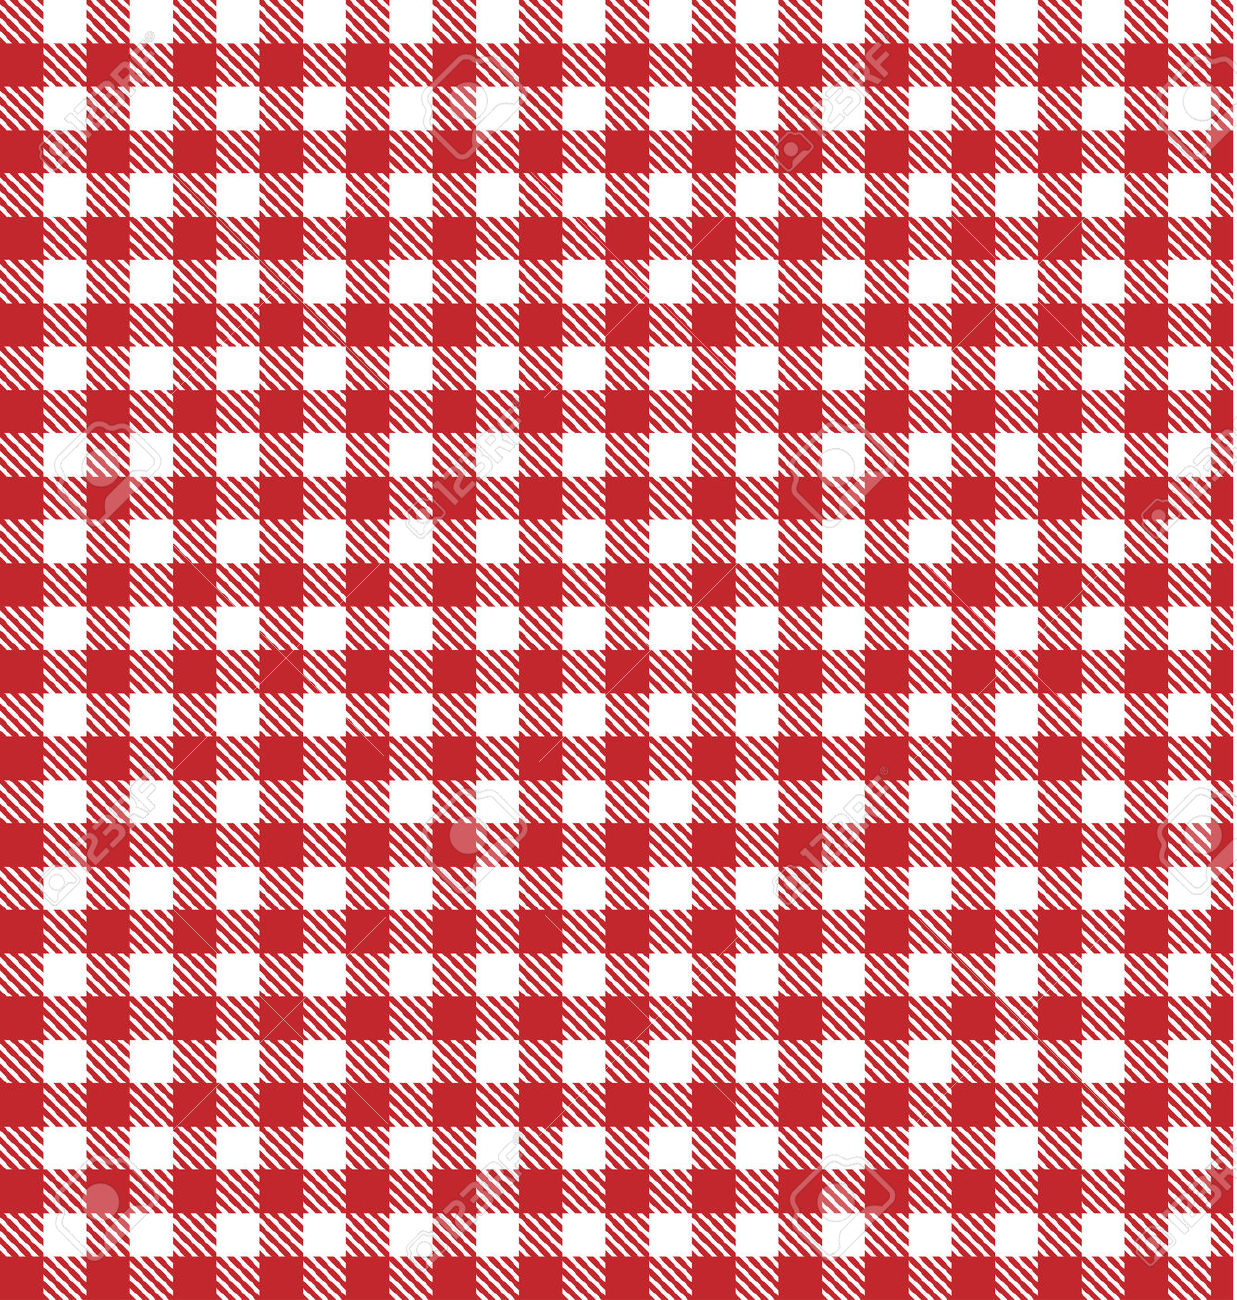 Red checkered background clipart - Clipground